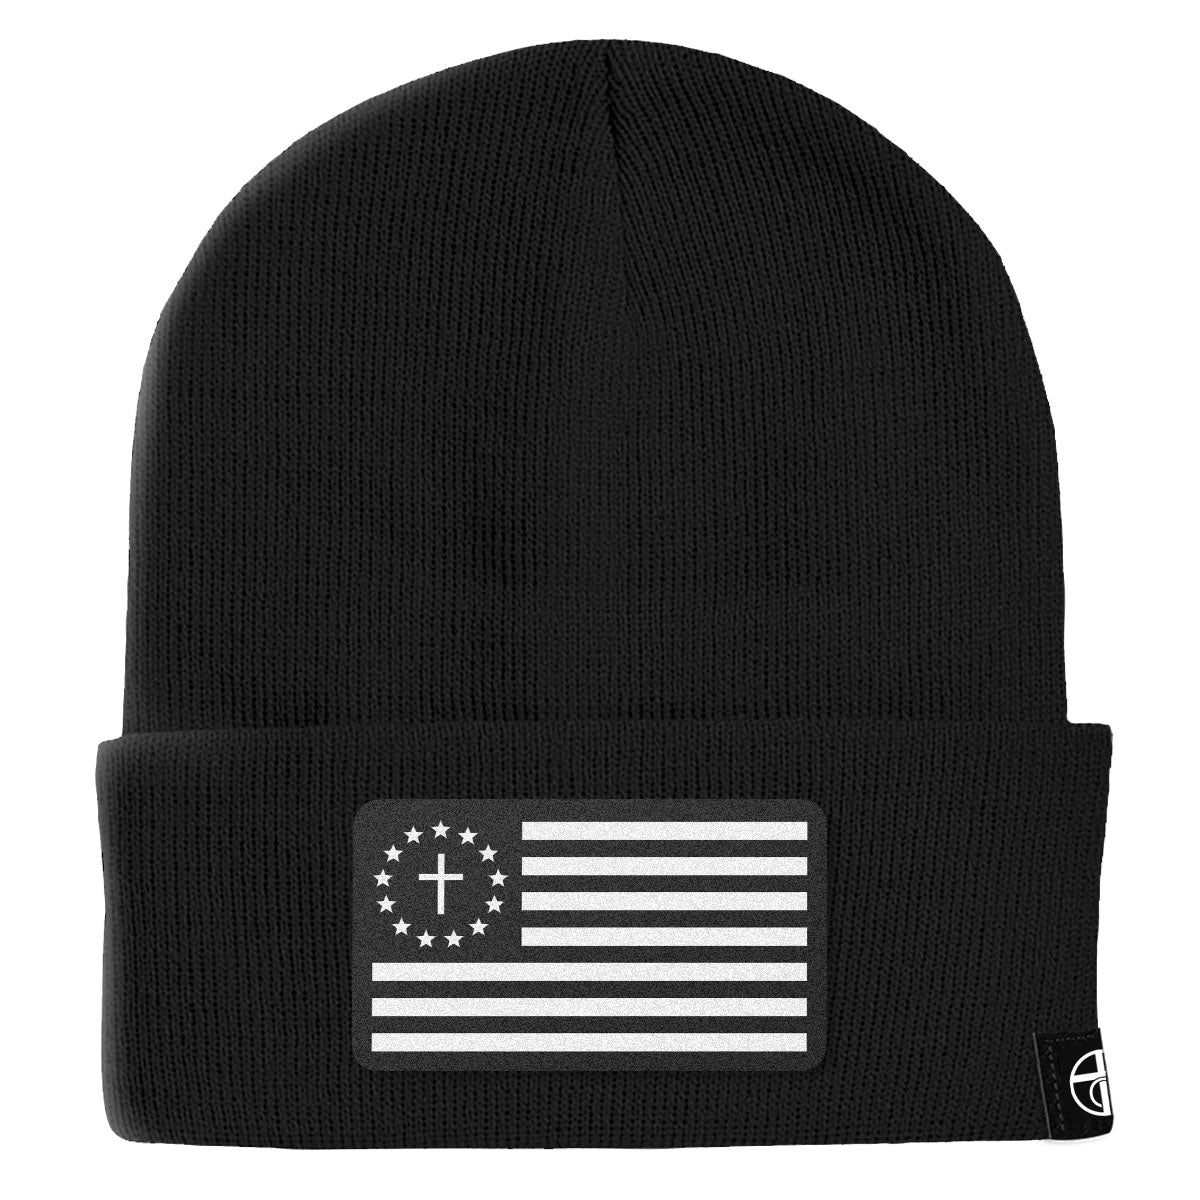 One Nation Under God White Leather Patch Beanies